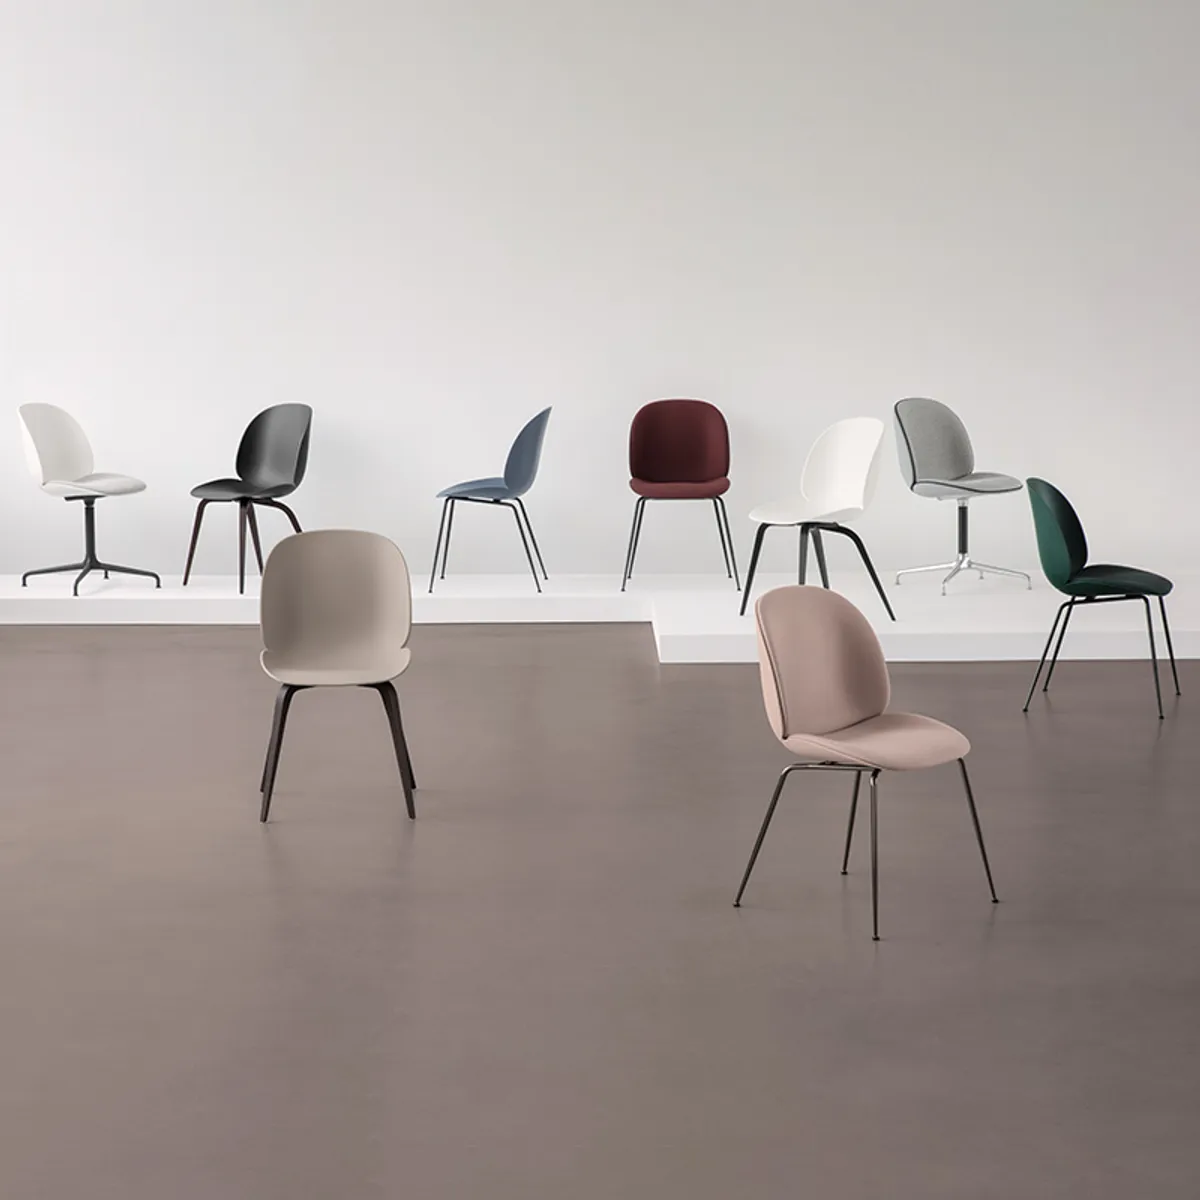 Beetle Collection Gubi Furniture Inside Out Contracts